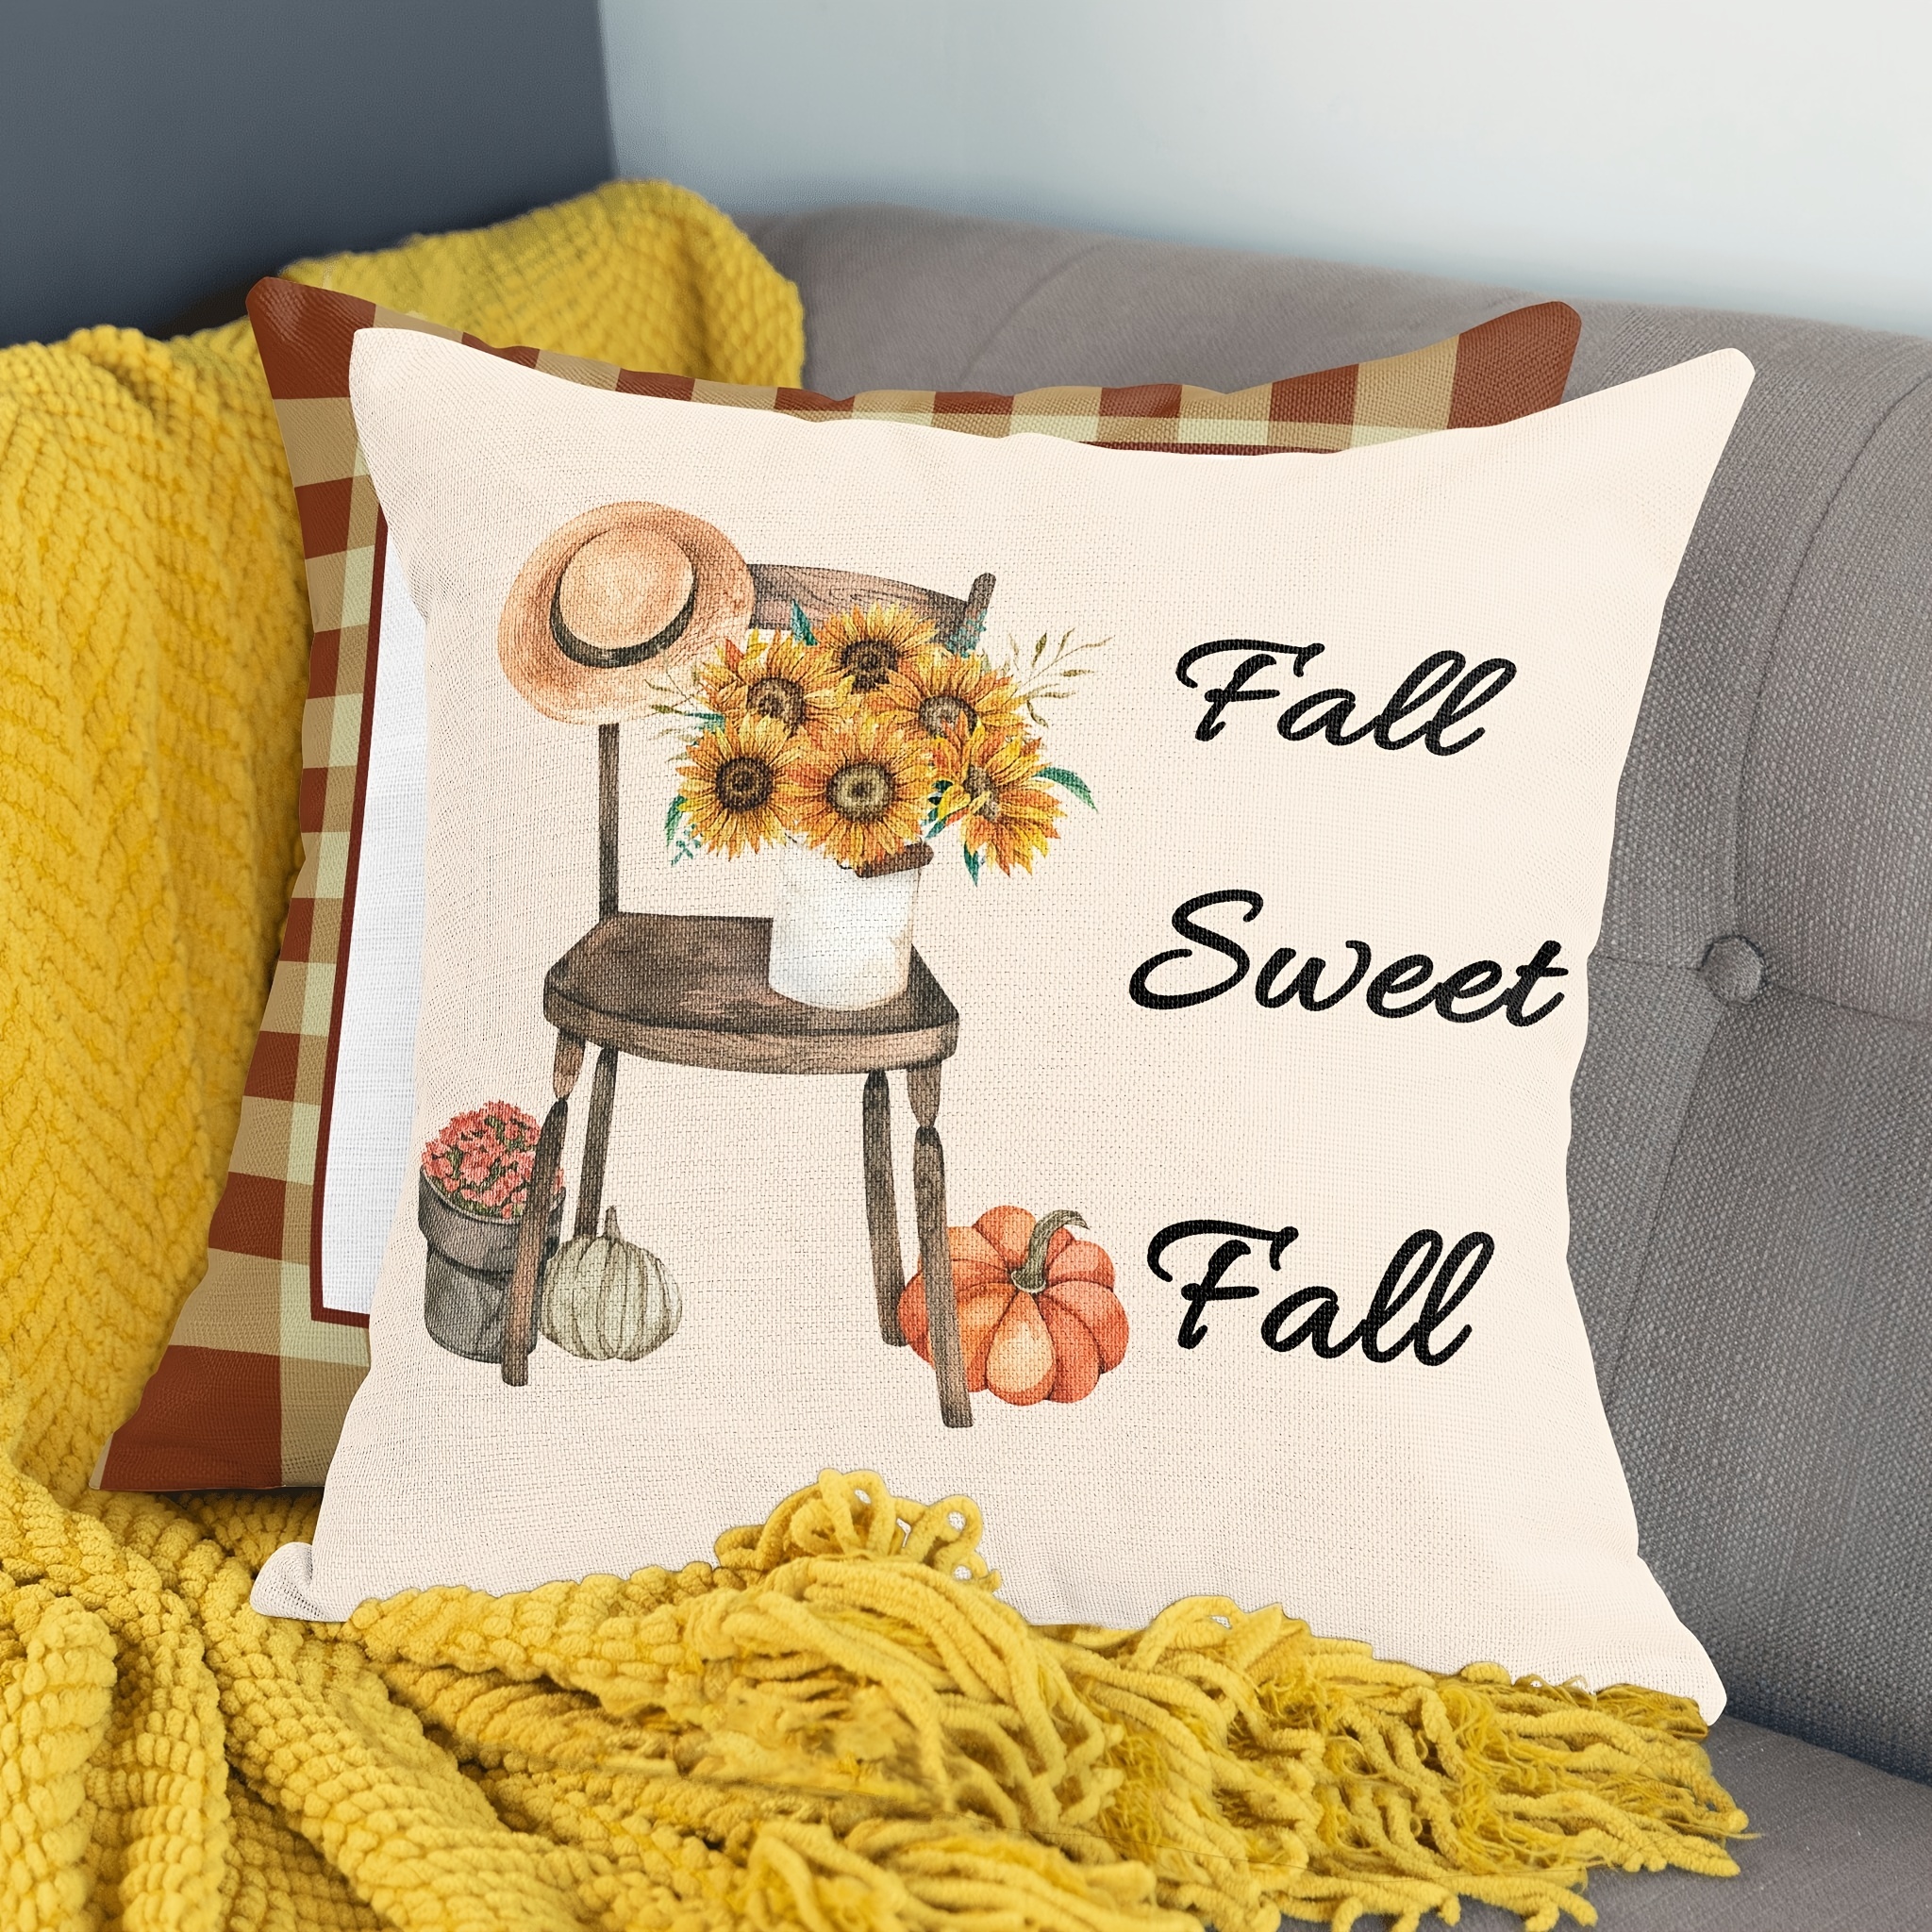 Fall Pillow Covers 18x18 For Fall Decor Pumpkin Maple Leaves Sunflo